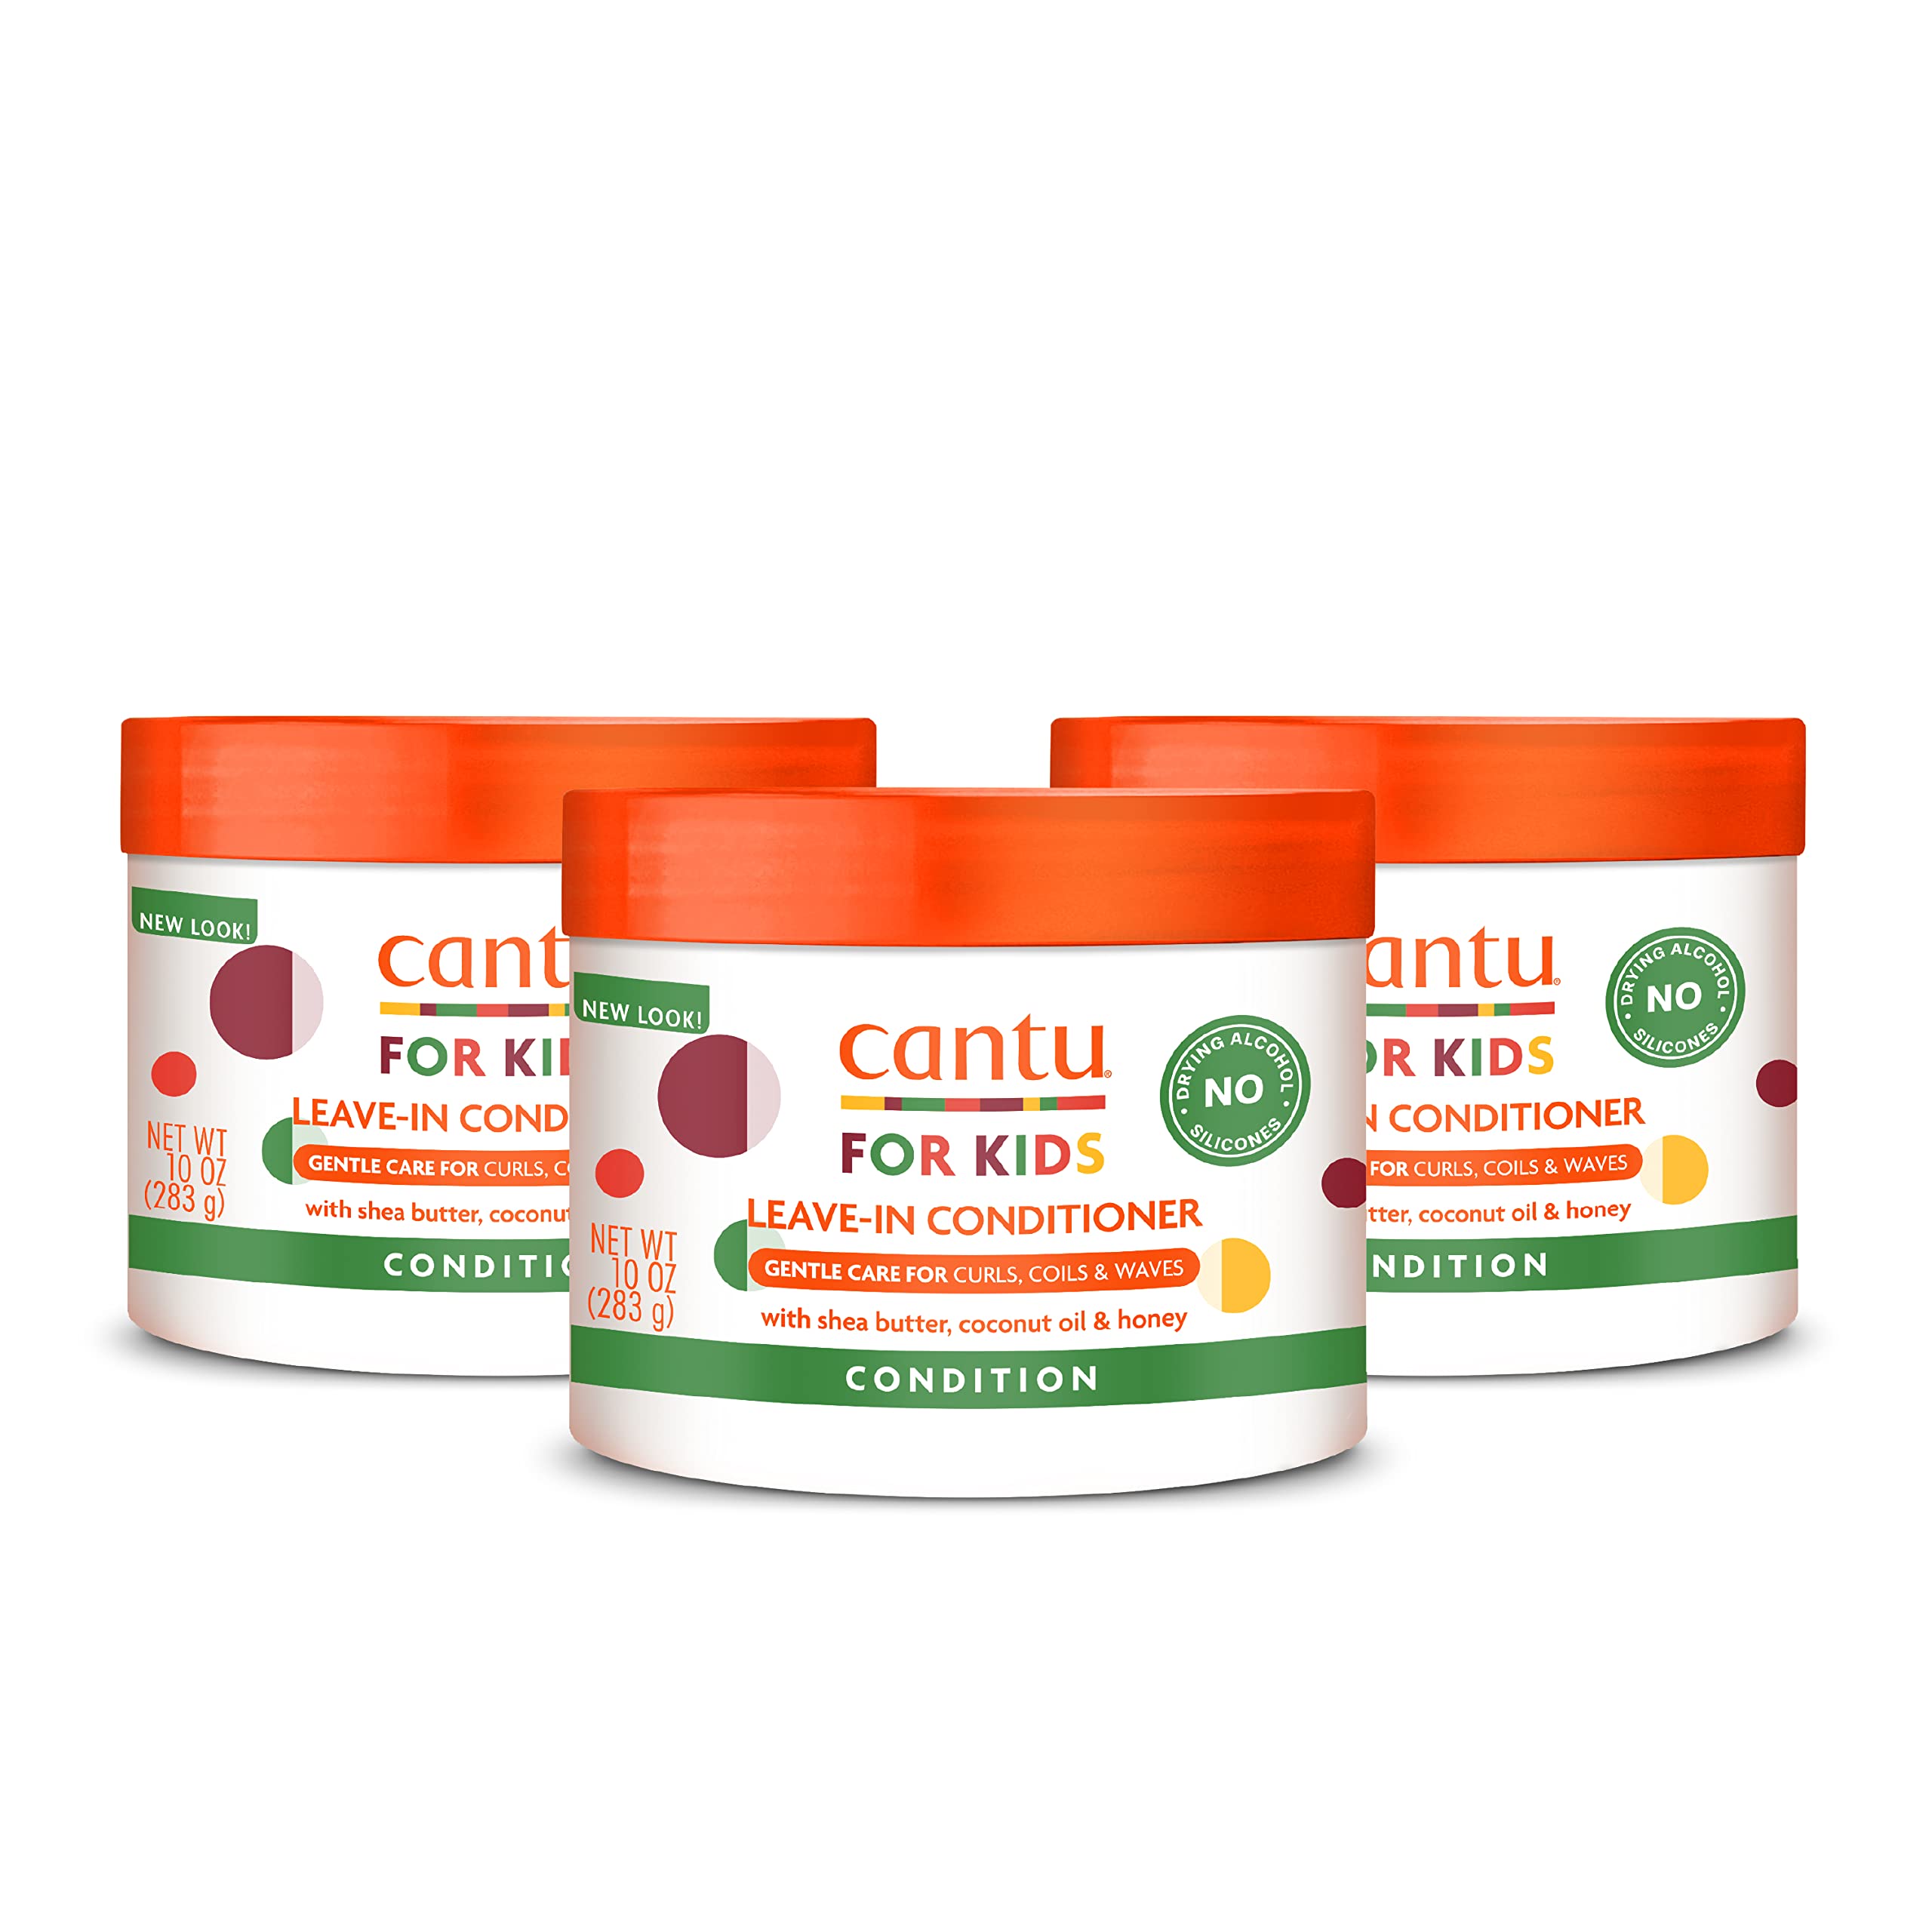 Cantu Care for Kids Leave-In Conditioner with Shea Butter, 10 oz (Pack of 3) (Packaging May Vary)